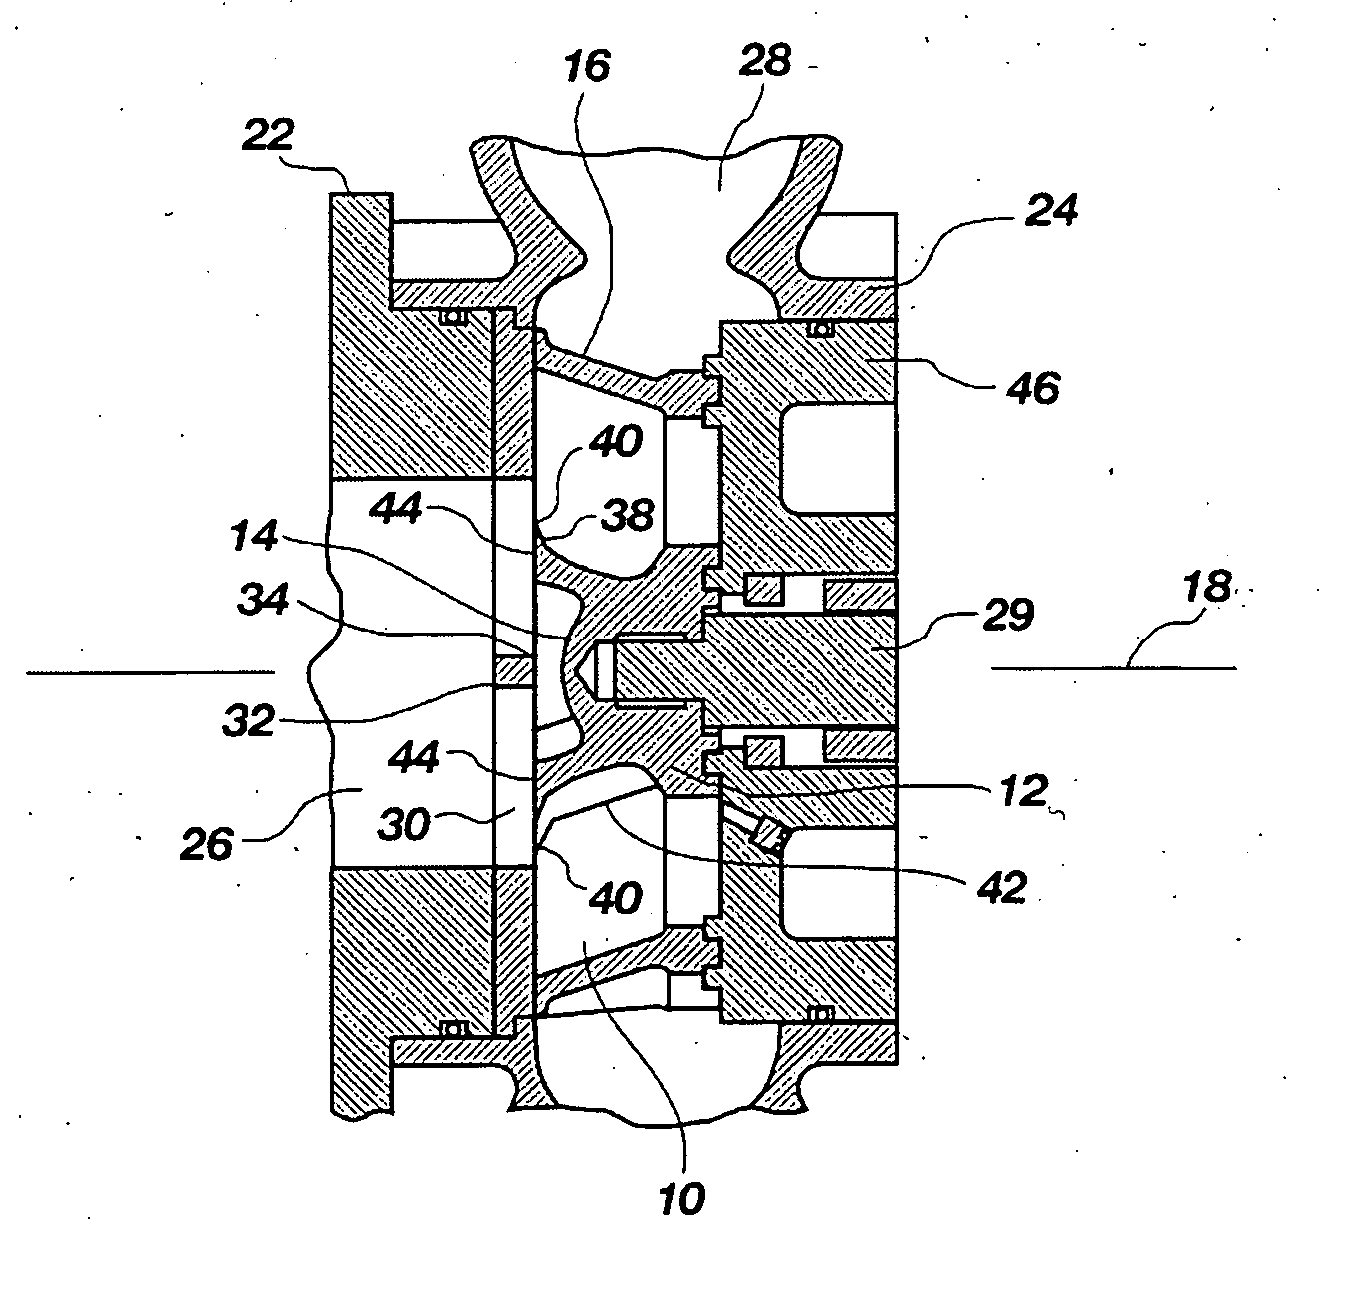 Impeller vane configuration for a centrifugal pump